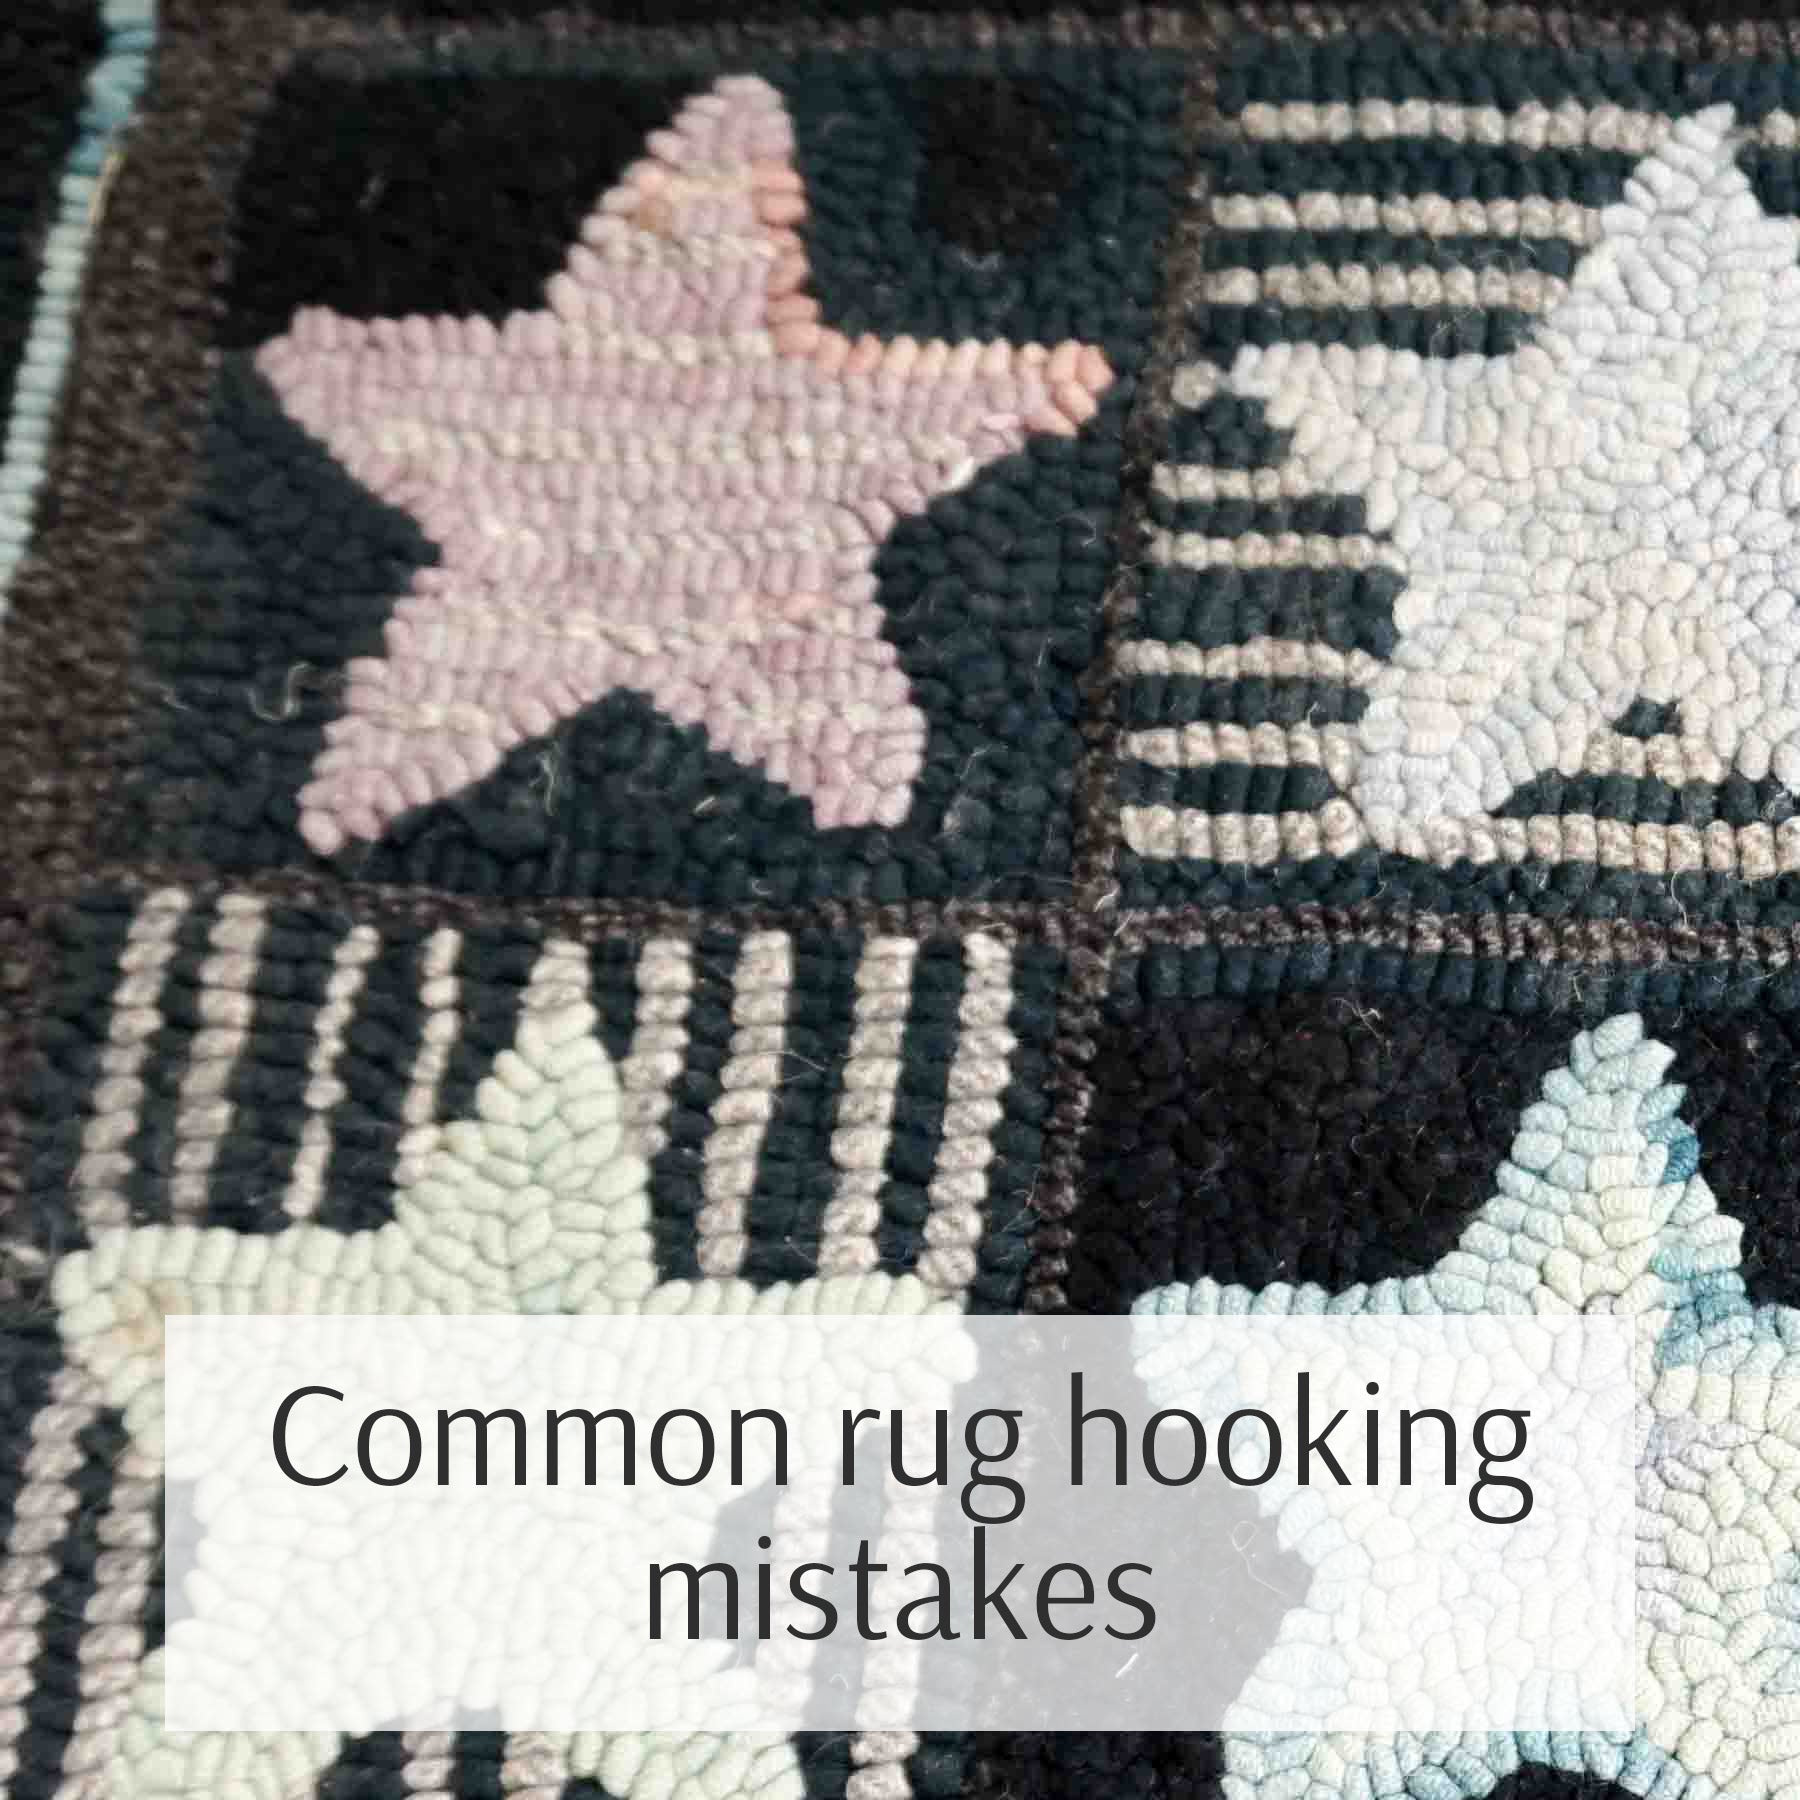 A few rug hooking tips (from learning the hard way)